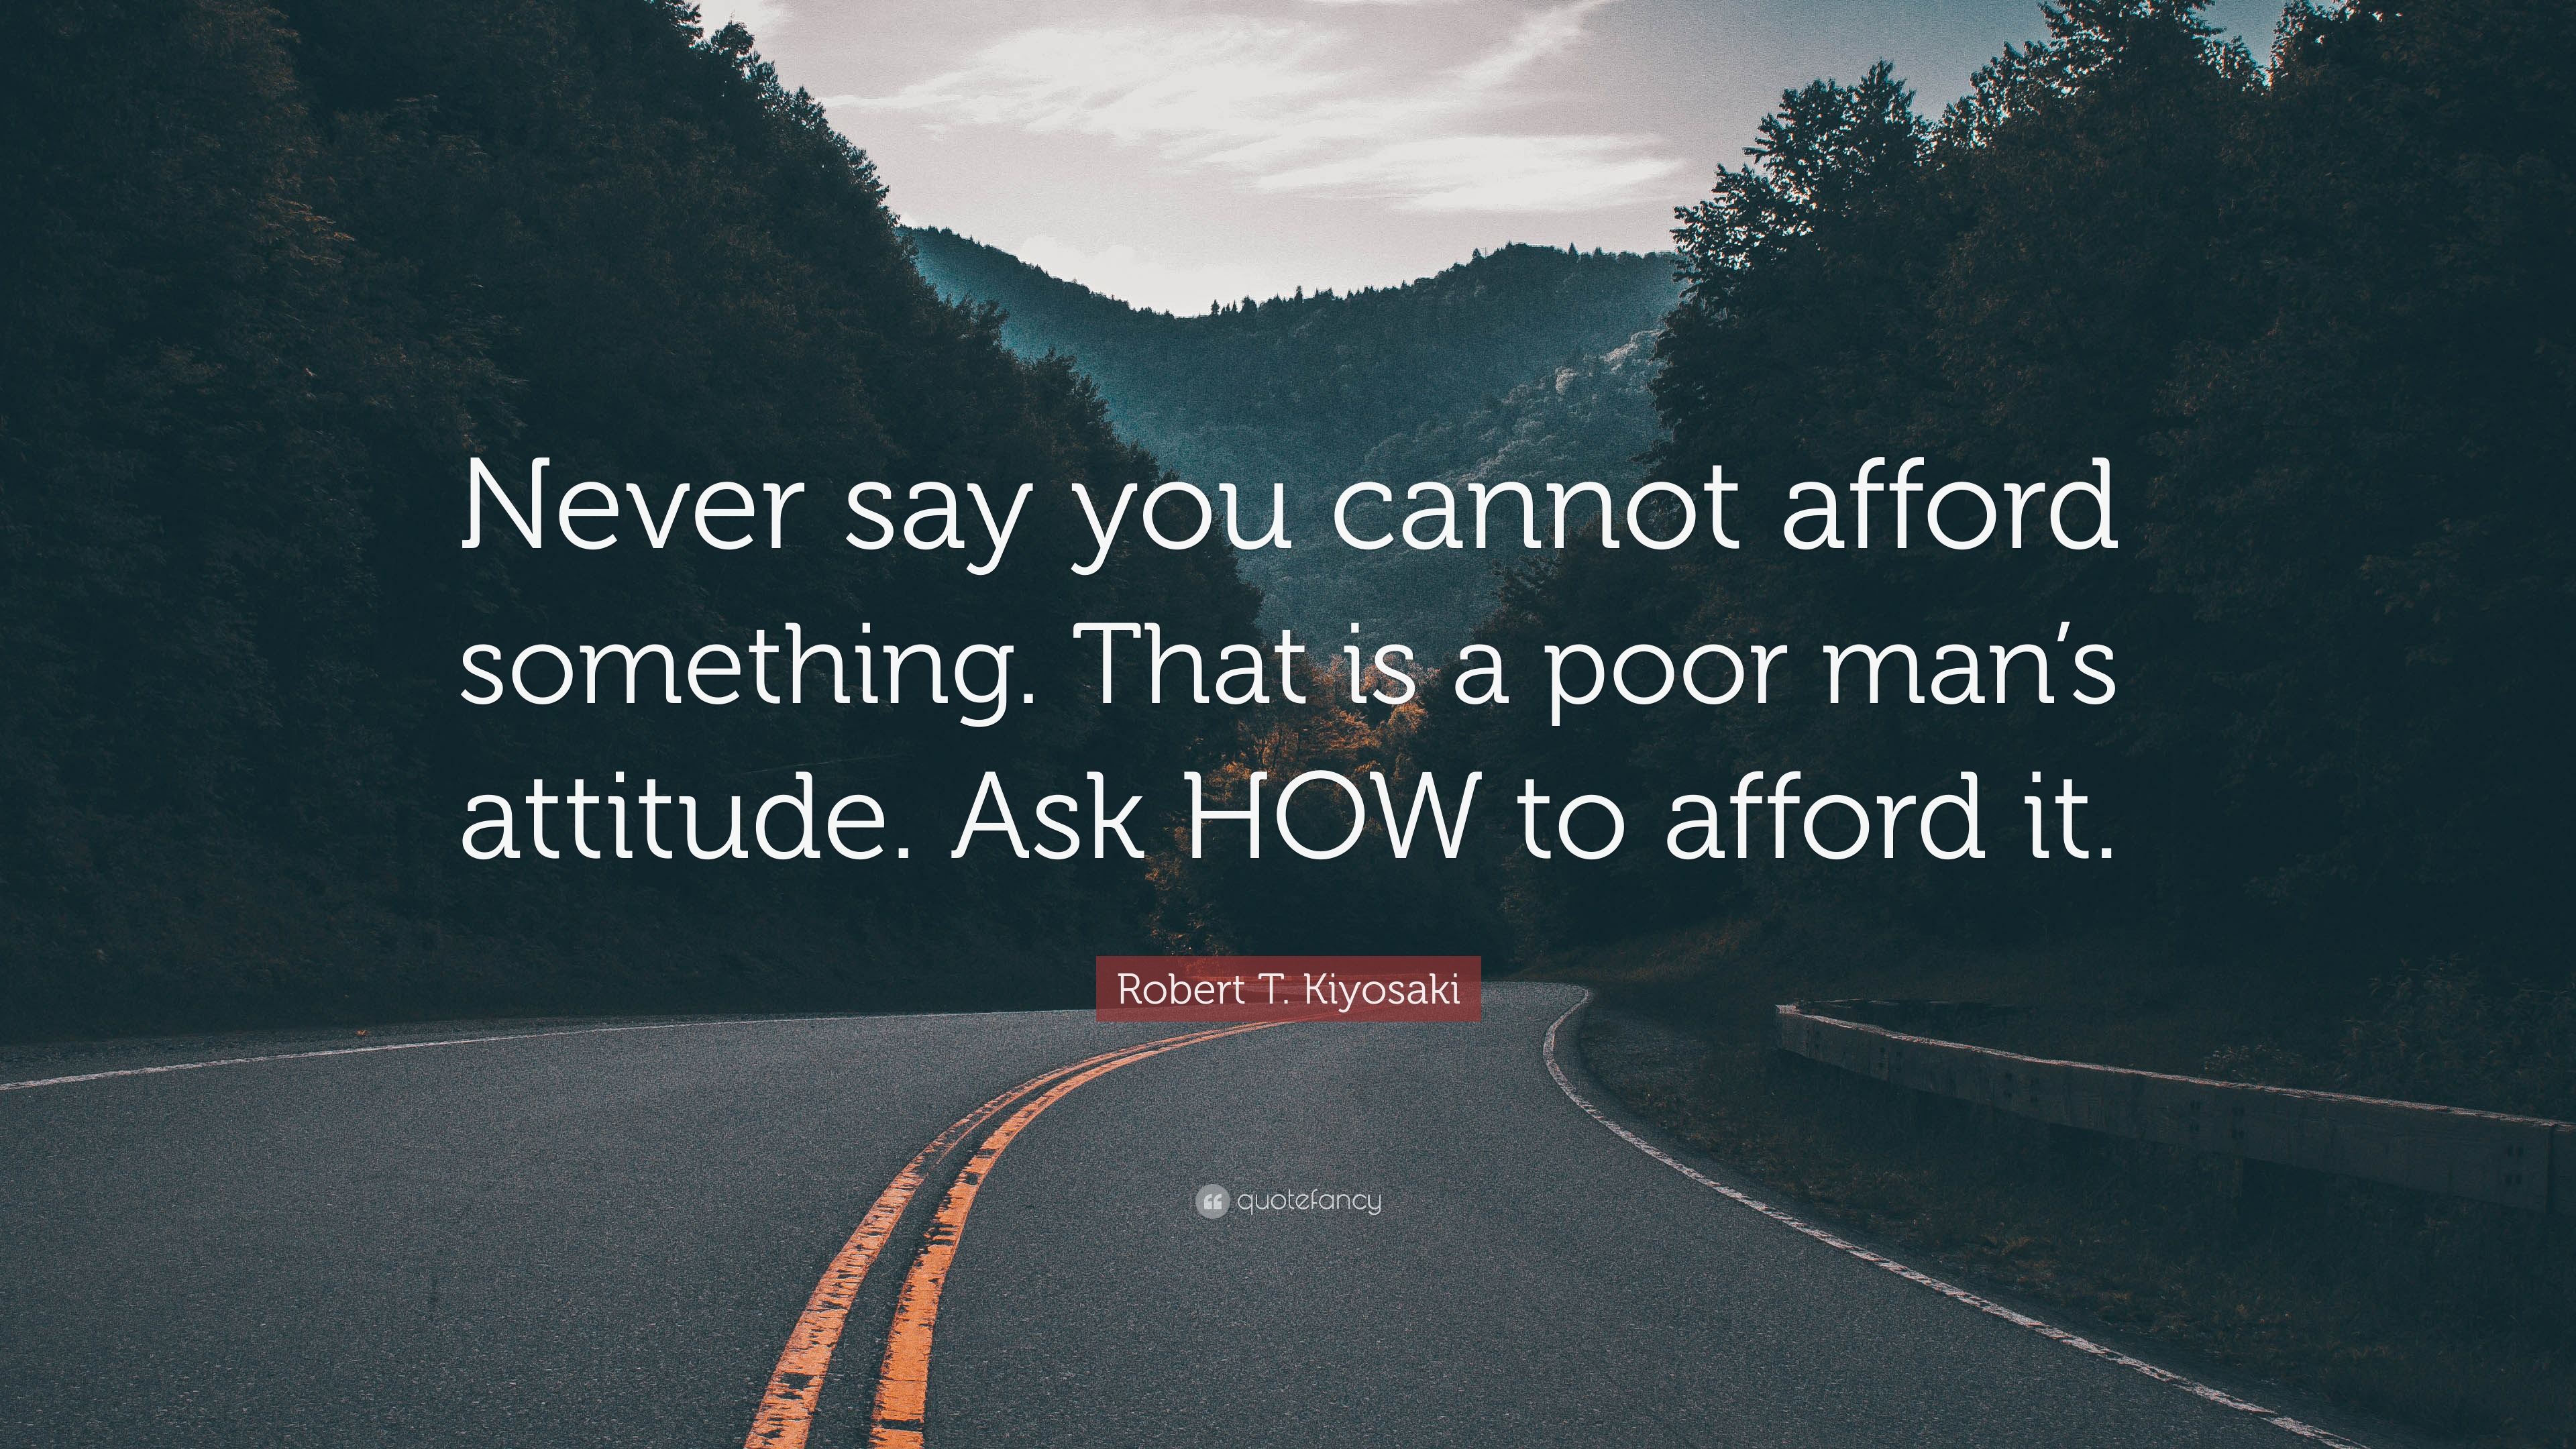 Robert T Kiyosaki Quote Never Say You Cannot Afford Something That Is A Poor Man S Attitude